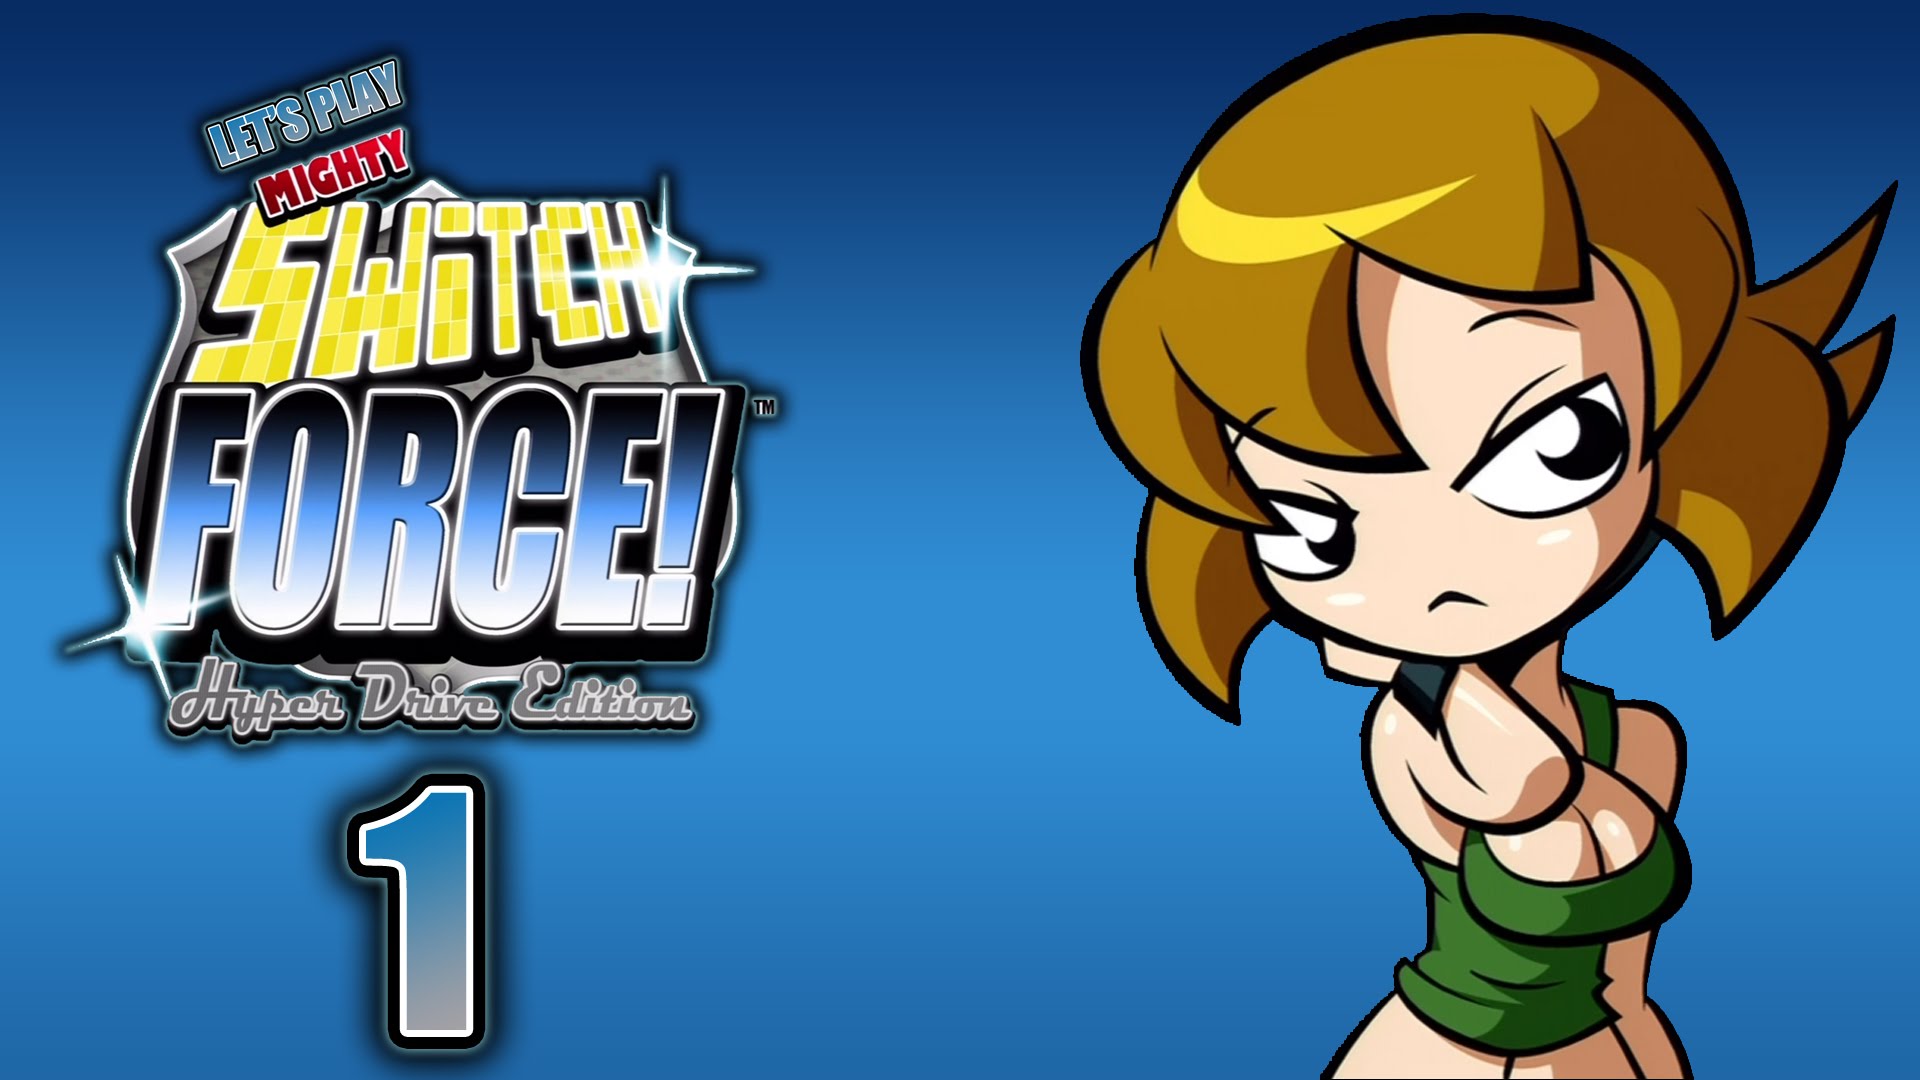 Mighty Switch Force! Hyper Drive Edition #25